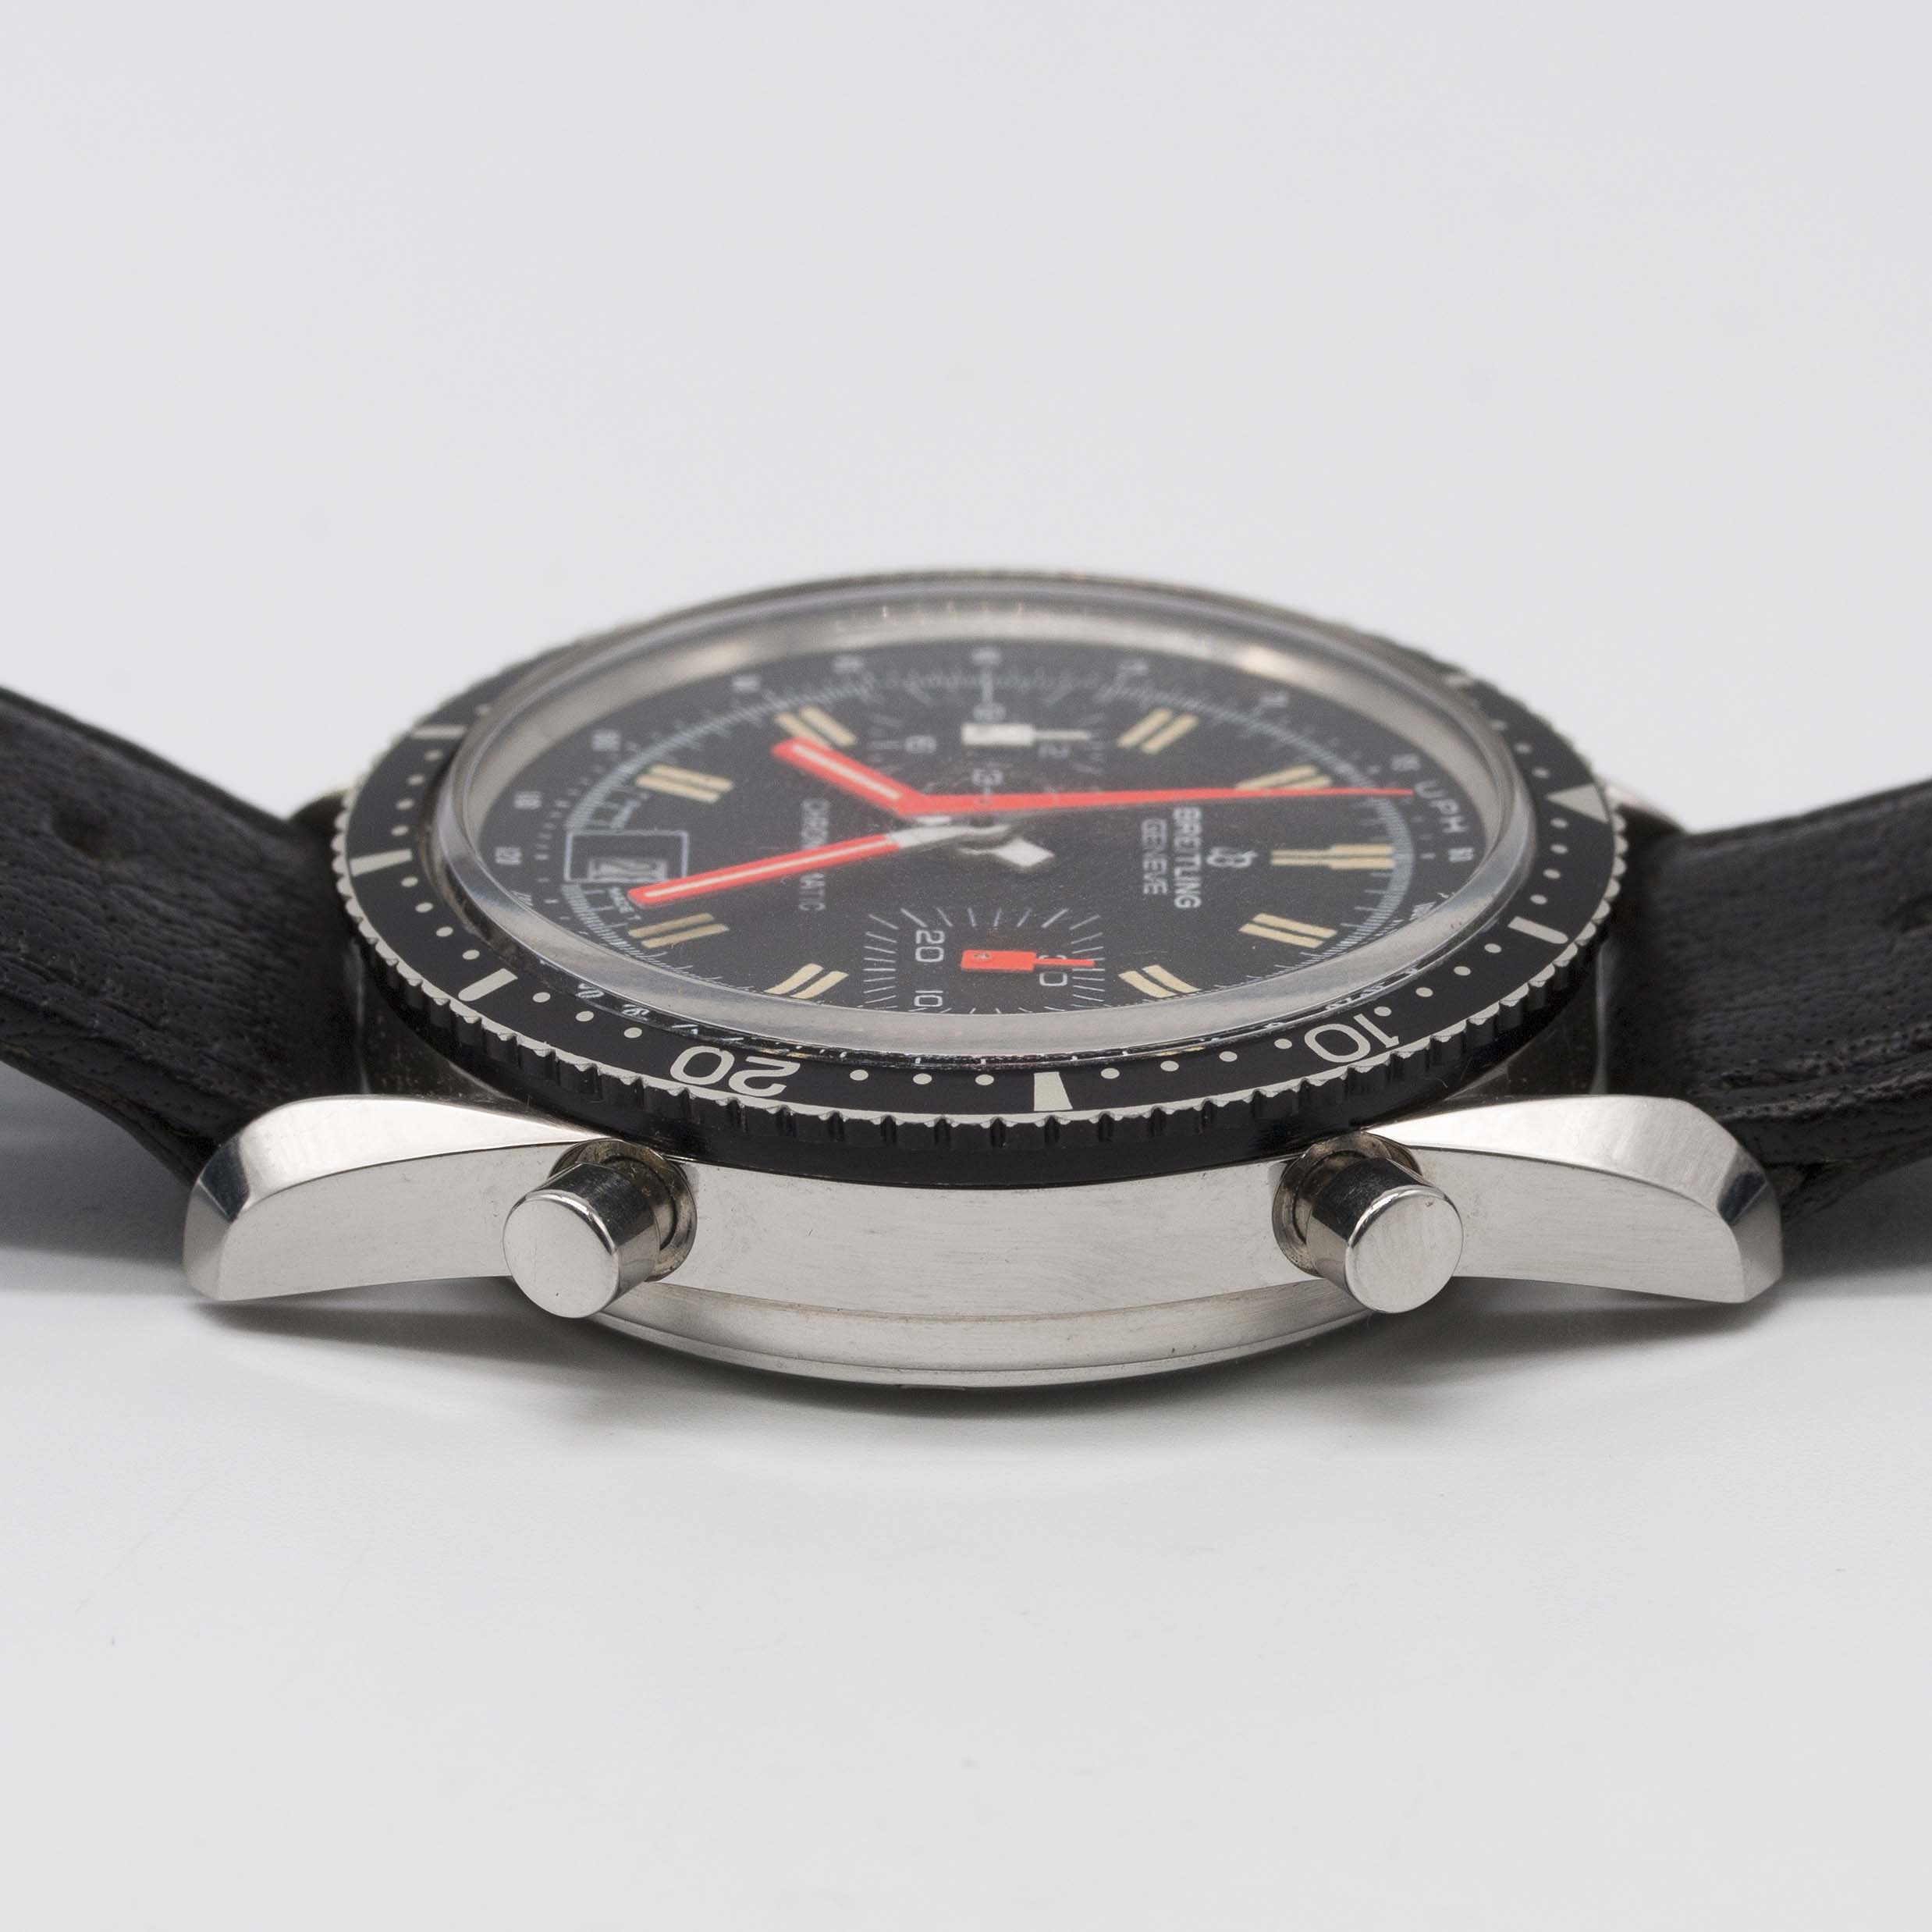 A RARE GENTLEMAN'S STAINLESS STEEL BREITLING CHRONO-MATIC CHRONOGRAPH WRIST WATCH CIRCA 1977, REF. - Image 12 of 12